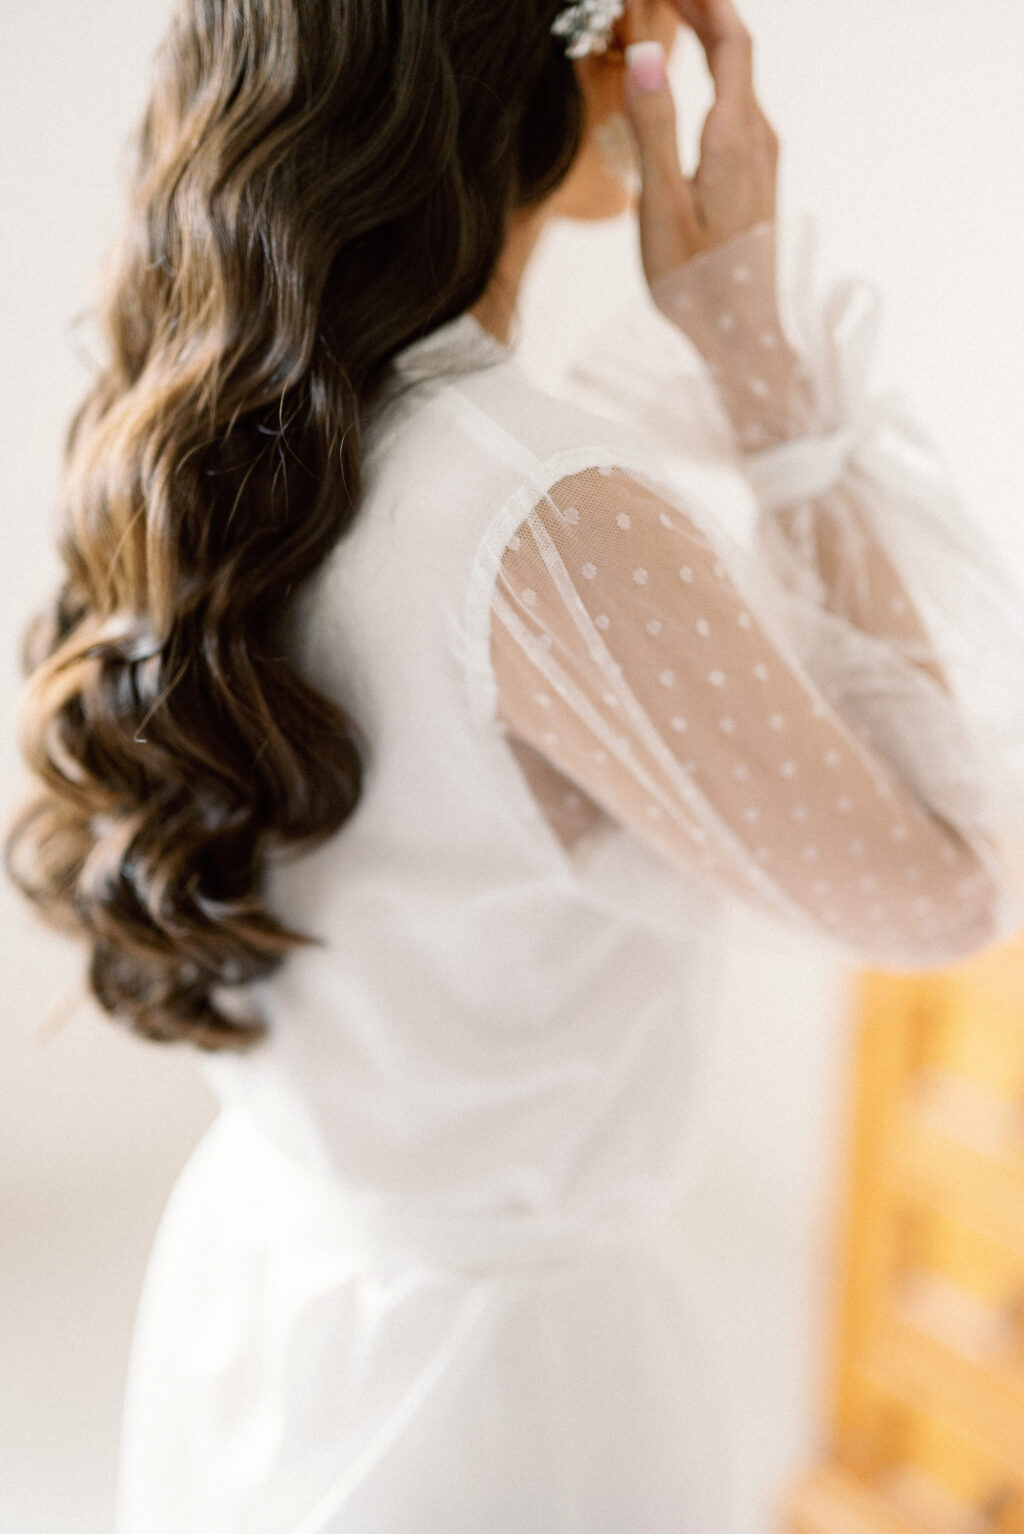 White Swiss Dot Wedding Robe Inspiration | Bride and Bridesmaids Getting Ready